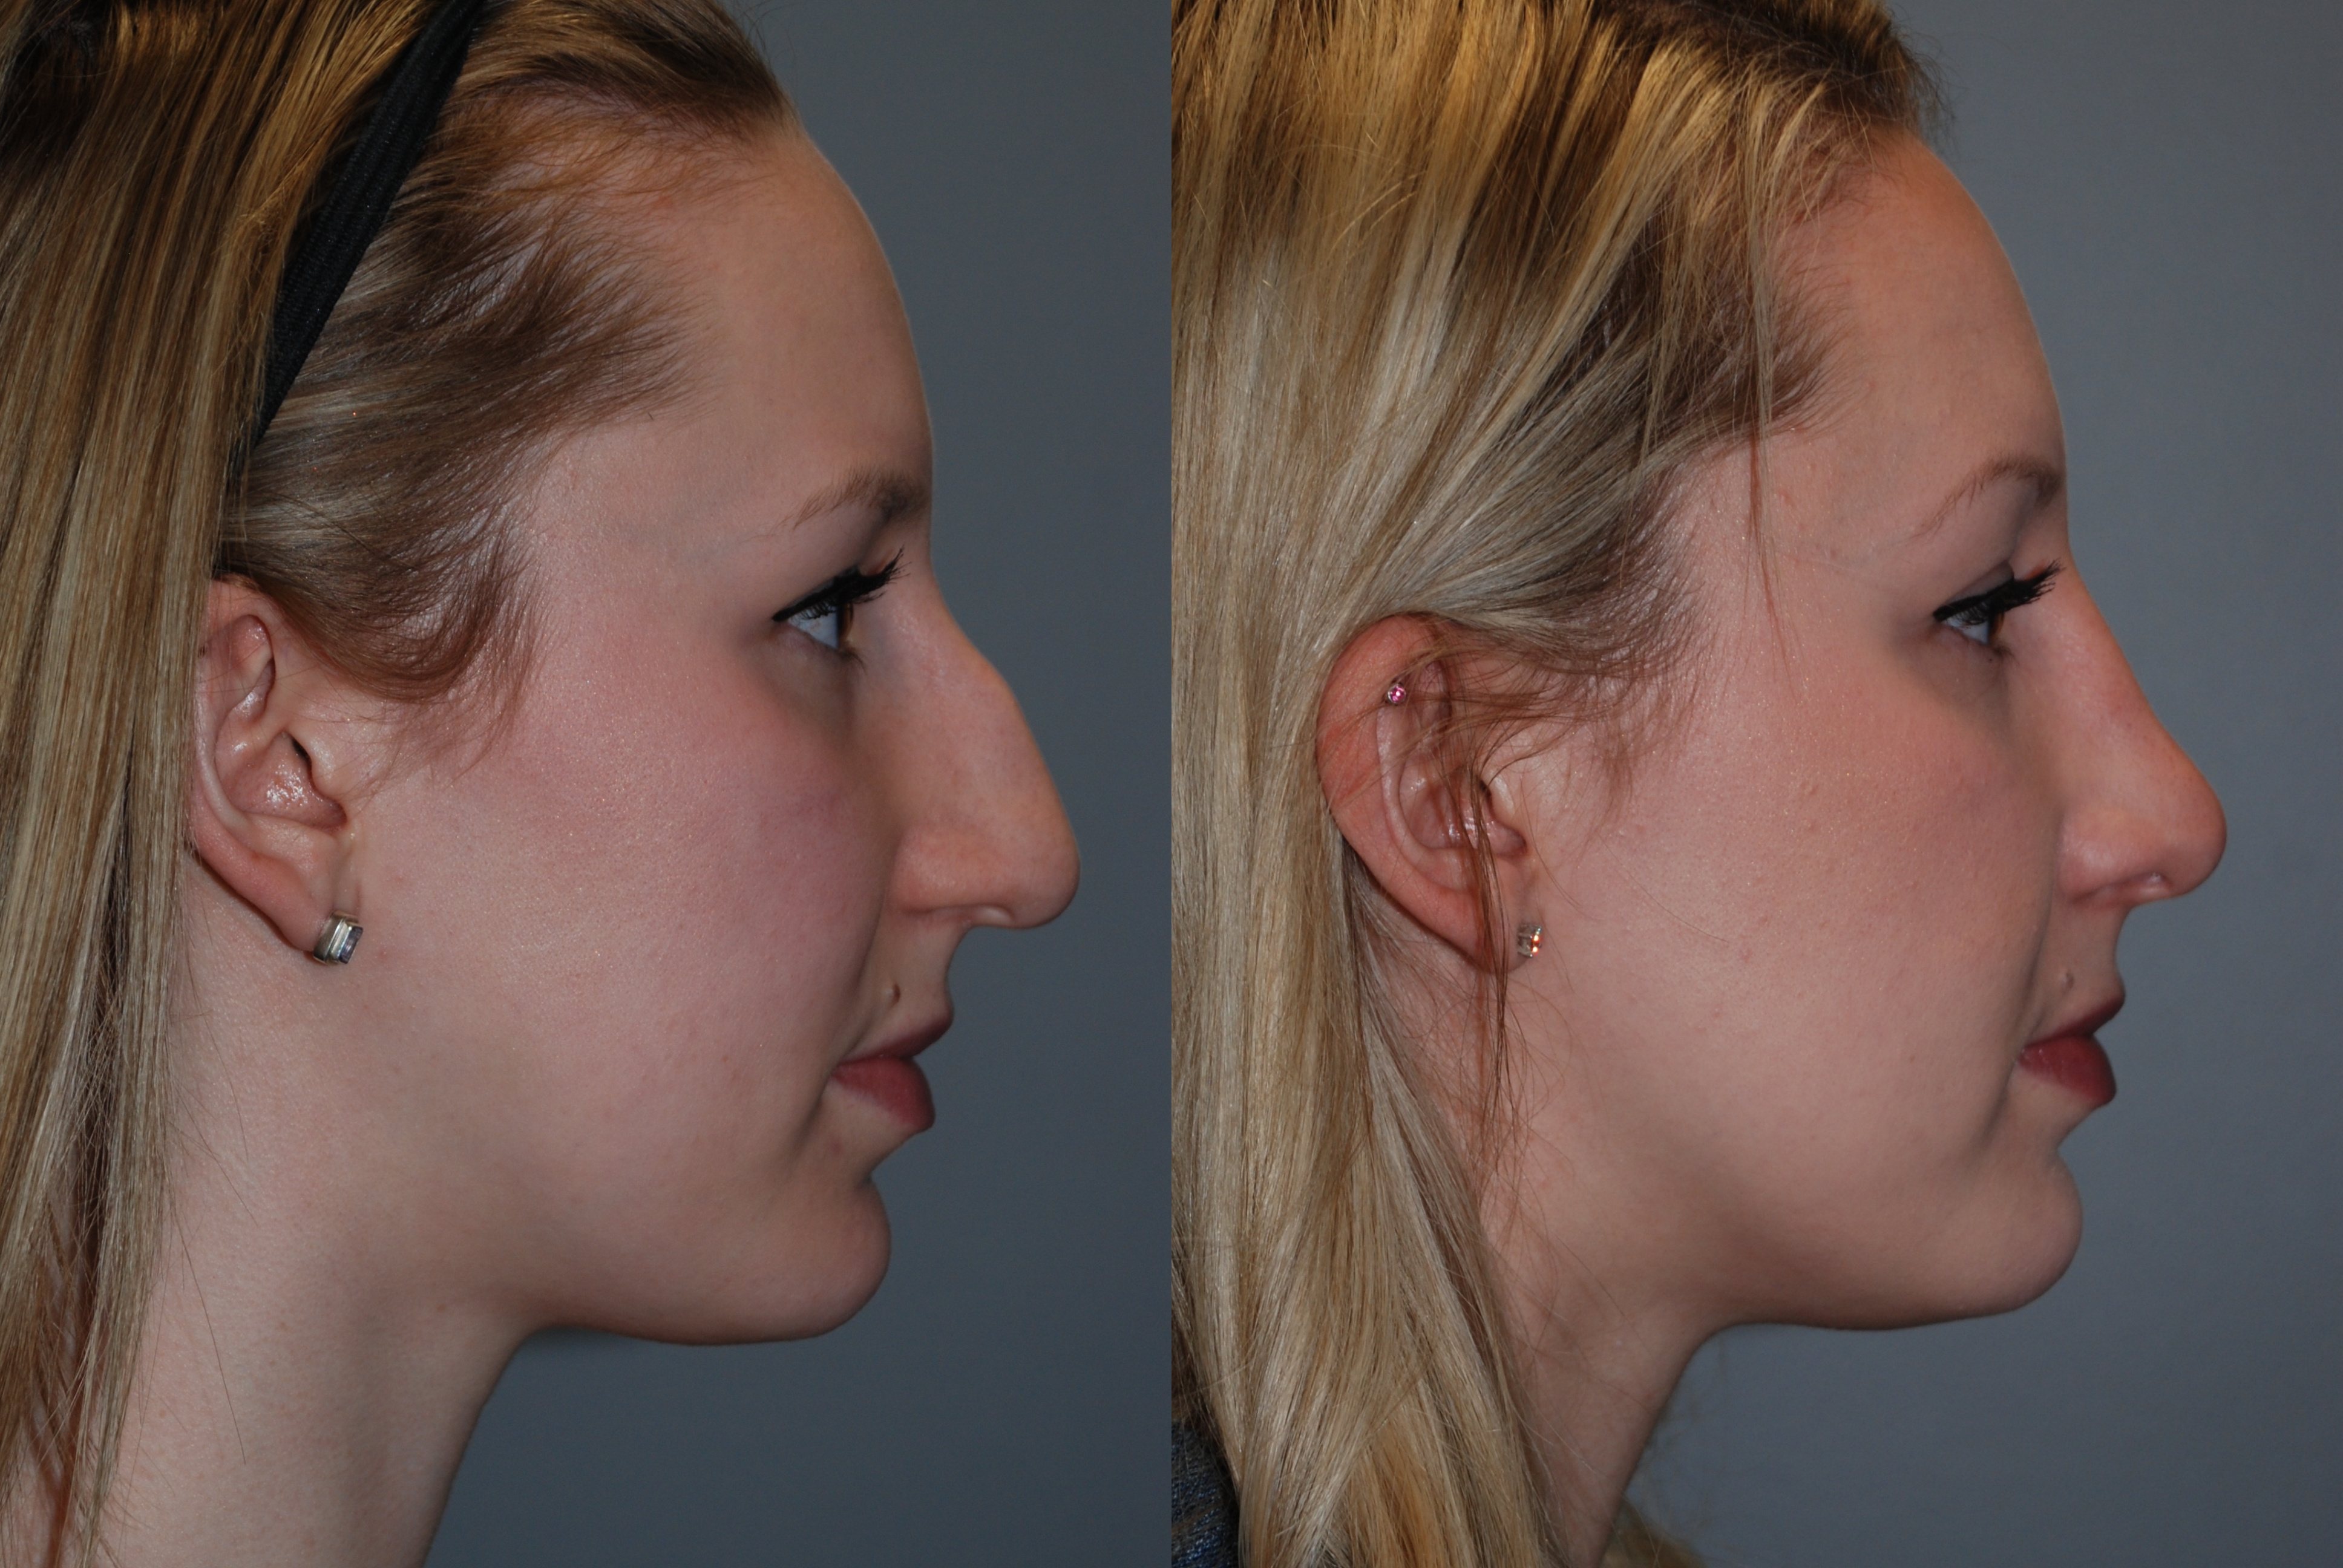 Before and after rhinoplasty: Facial transformation